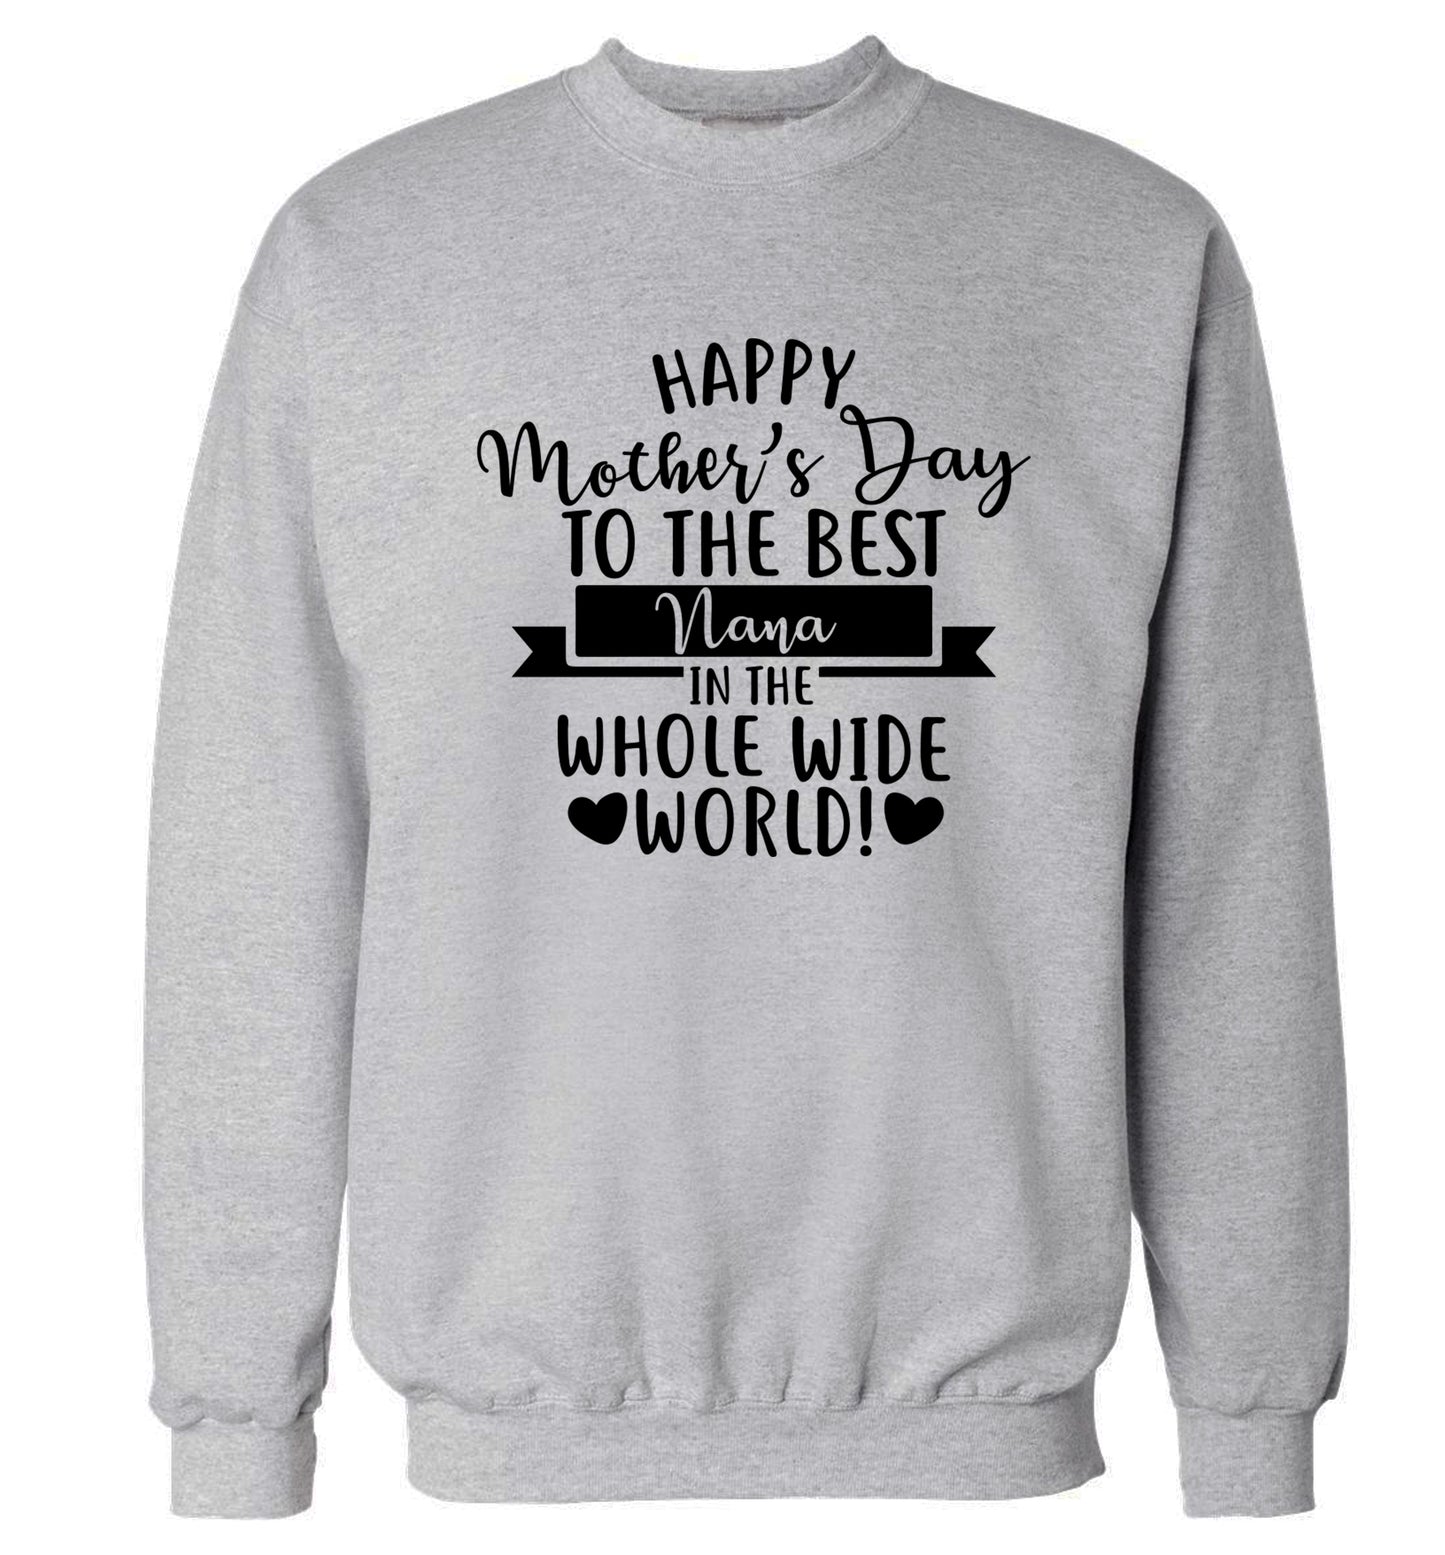 Happy mother's day to the best Nana in the world Adult's unisex grey Sweater 2XL